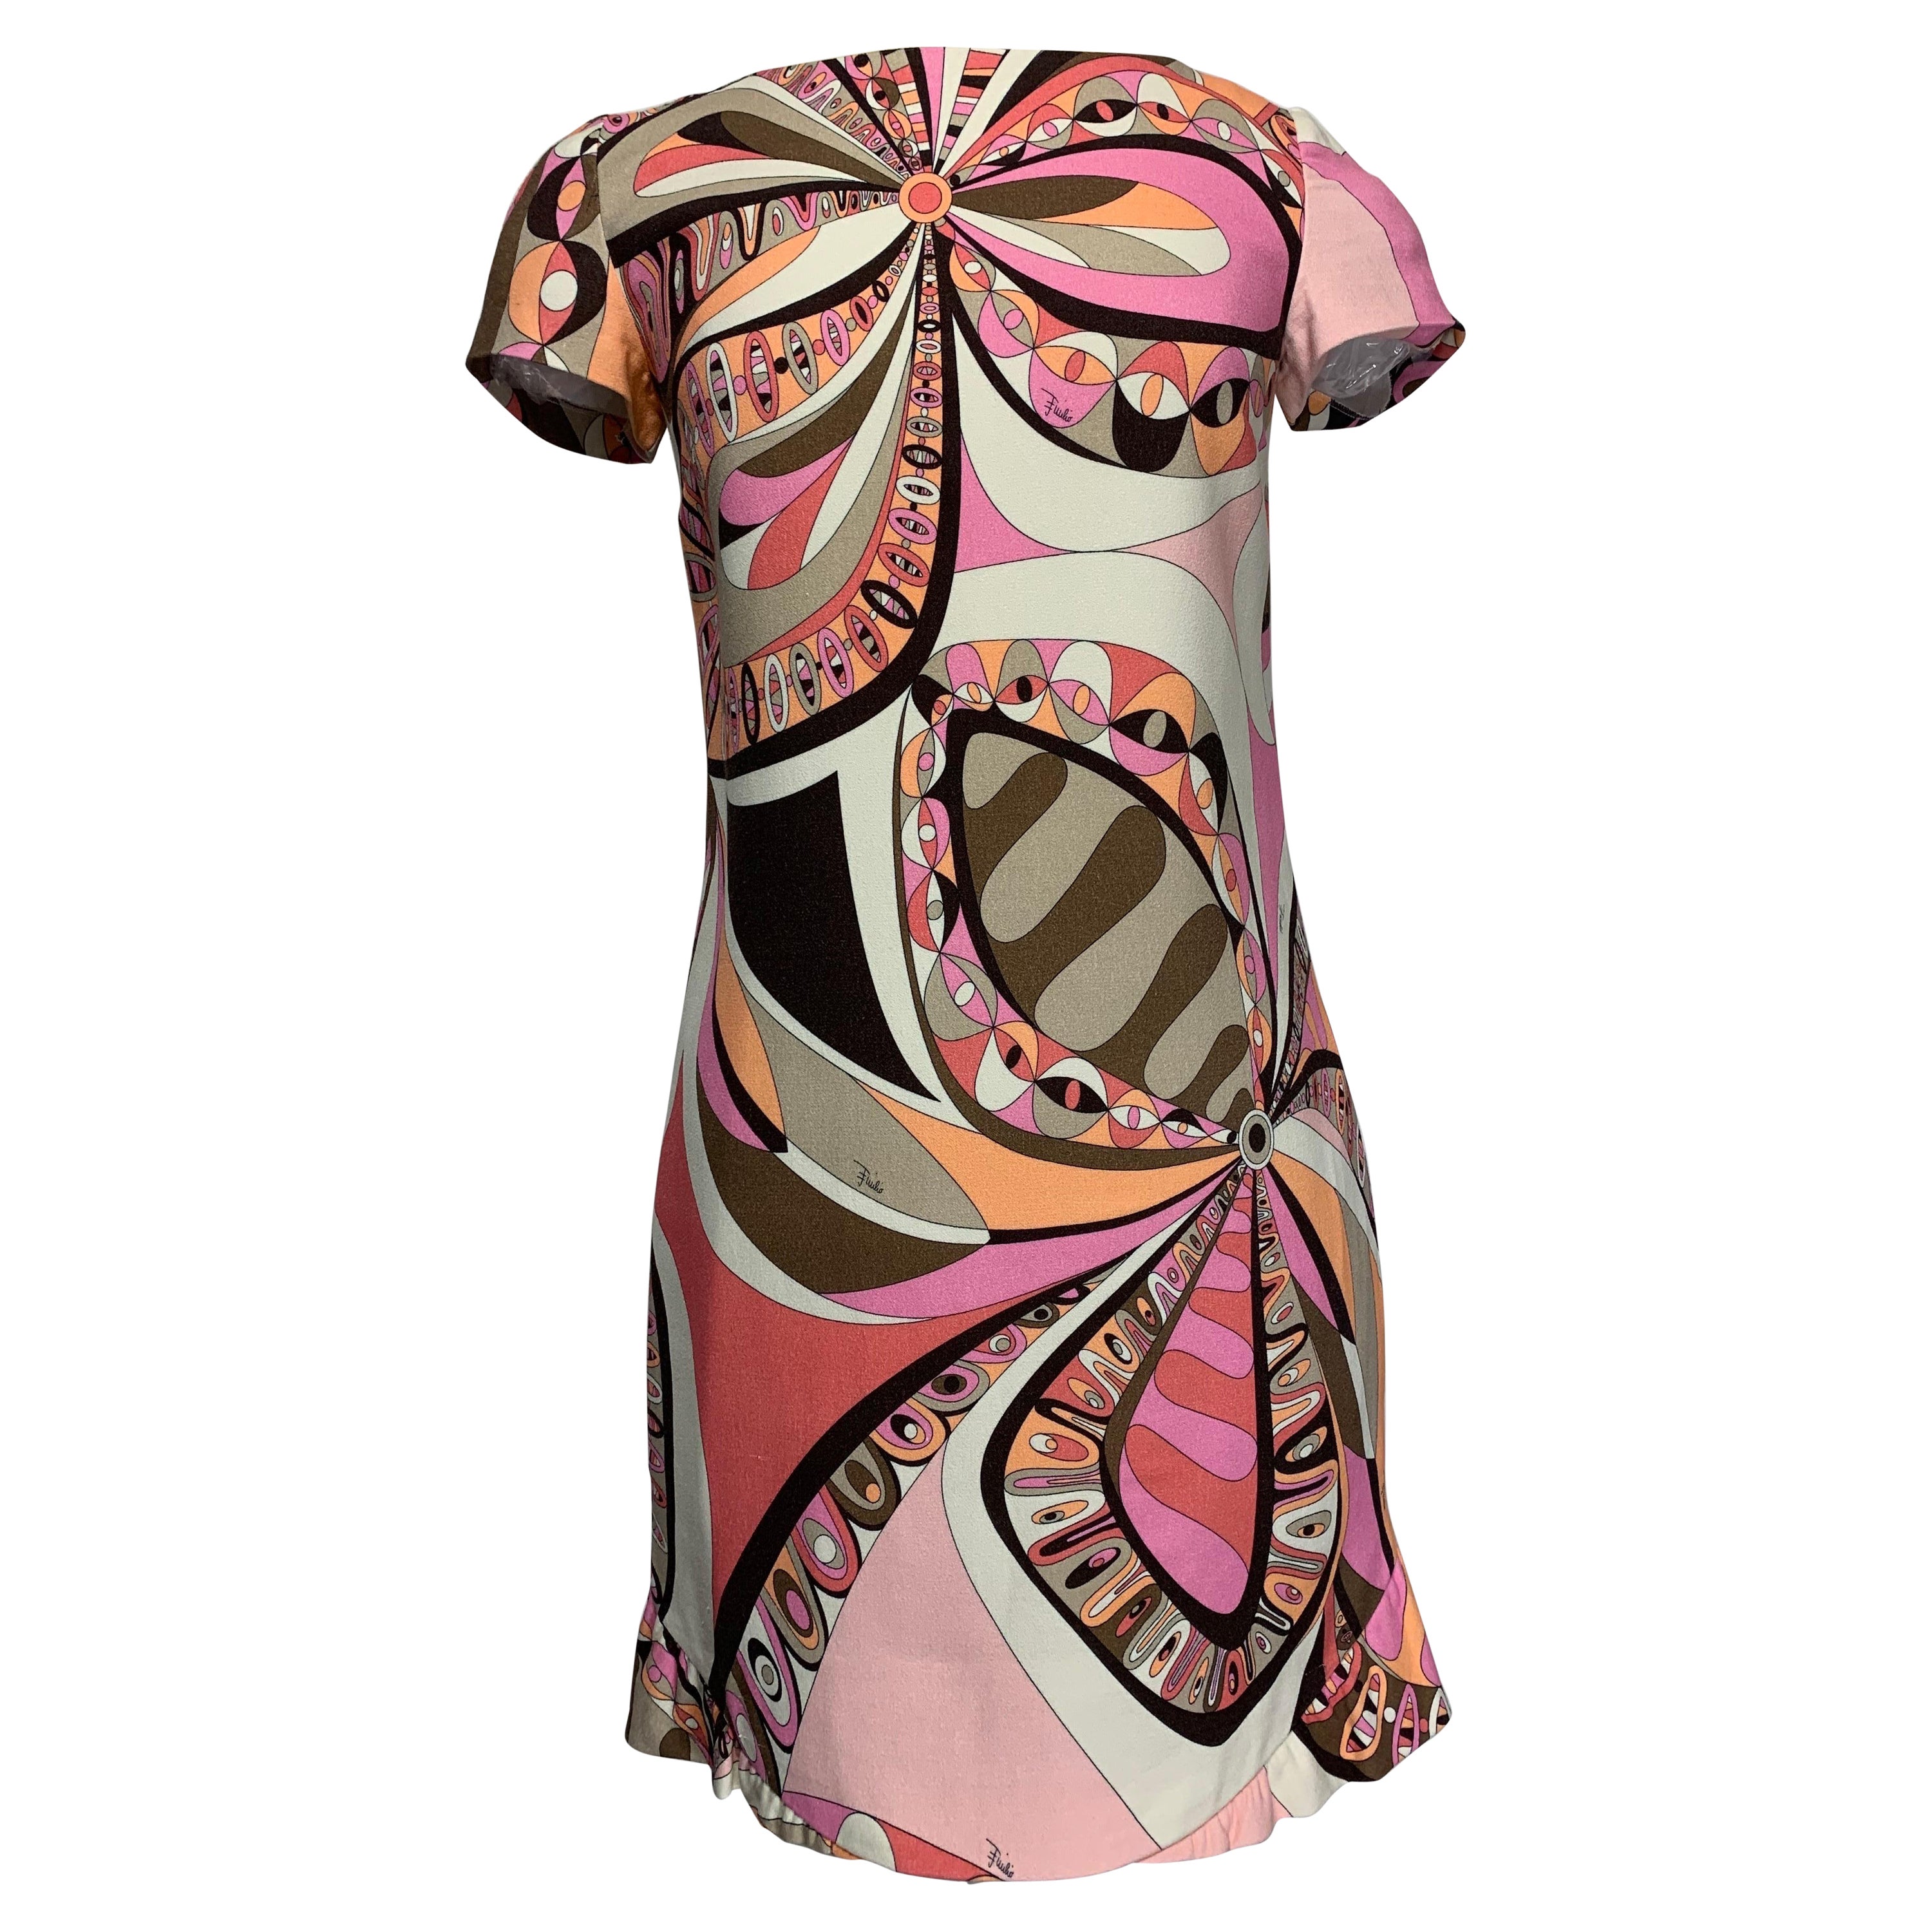 Contemporary Emilio Pucci Mod-Style Short-Sleeved Day Dress in Taupe Pink Print For Sale